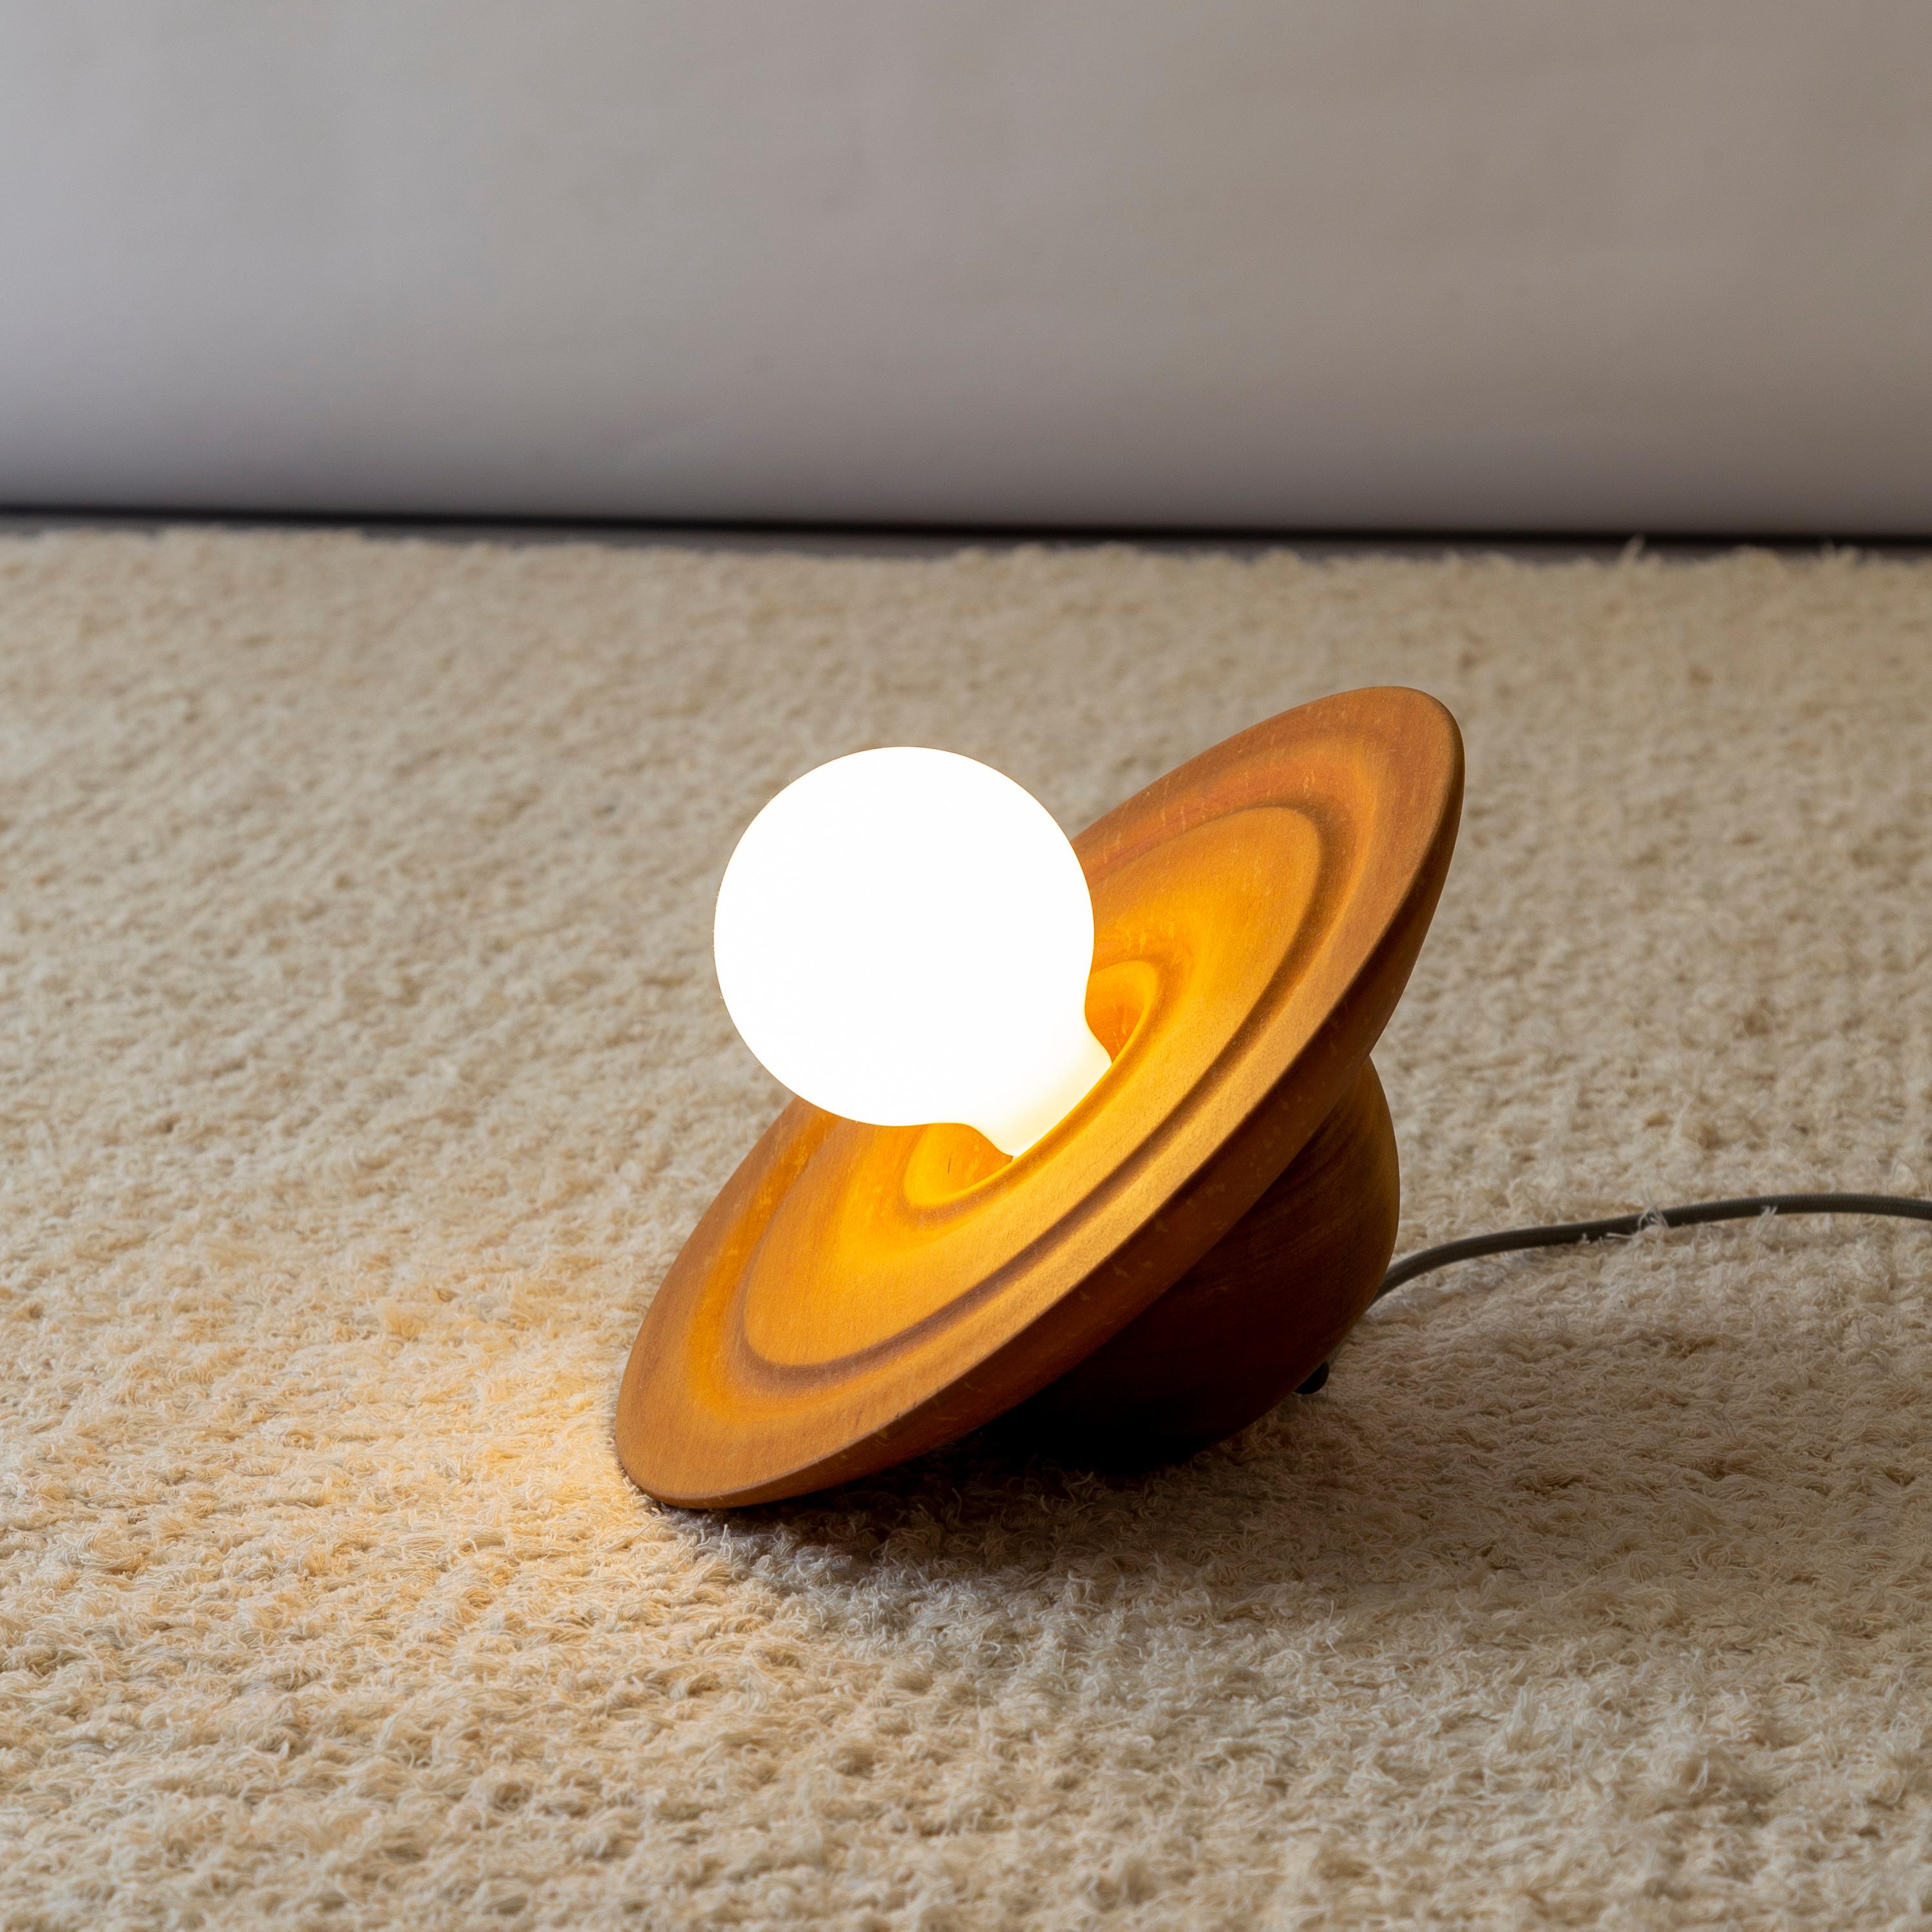 The Astro Rei table lamp is a design piece made entirely of noble wood and handcrafted in the turning process. Each piece is carefully molded by hand, resulting in a lamp with a high-quality finish and a natural, organic charm.

One of the most